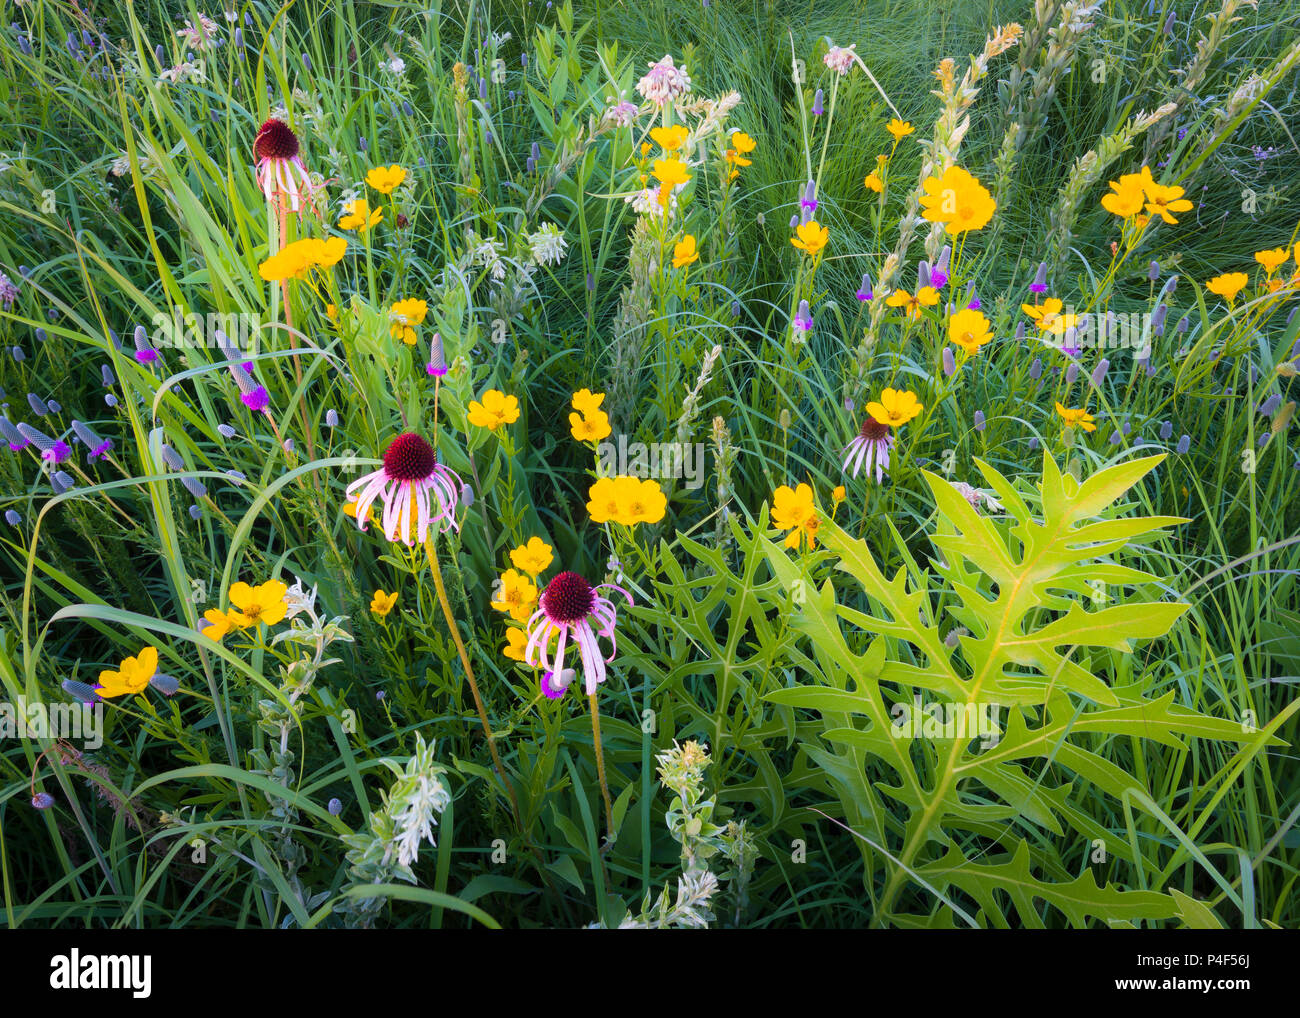 A combination of compass plant, purple coneflower, coreopsis and prairie clover create a beautiful native wildflower display at Schulenberg Prairie. Stock Photo